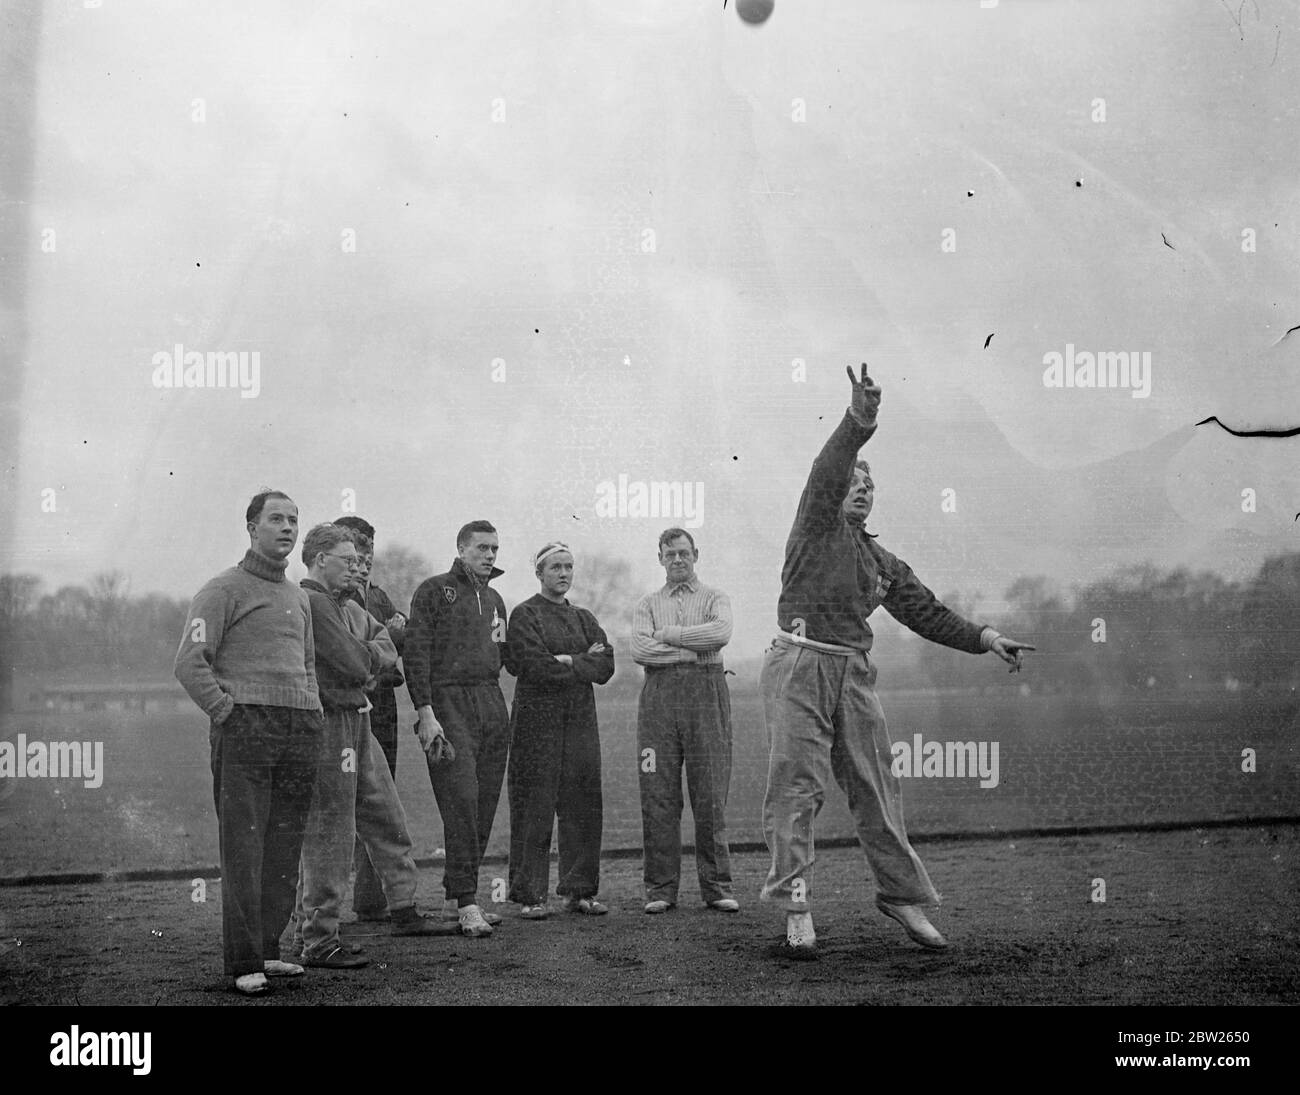 Finnish Olympic champion gives public demonstration to London athletes. Invited by the Amateur Athletics Association to tour Britain and gives displays, Armee Vaalate, the Finnish Olympic champion gave his first public demonstration in Battersea Park, London, today (Sunday). He has already given lectures and displays to the army and police force. Photo shows, Vaalste demonstrating putting the shot to a group of athletes in Battersea Park. 30 January 1938 Stock Photo